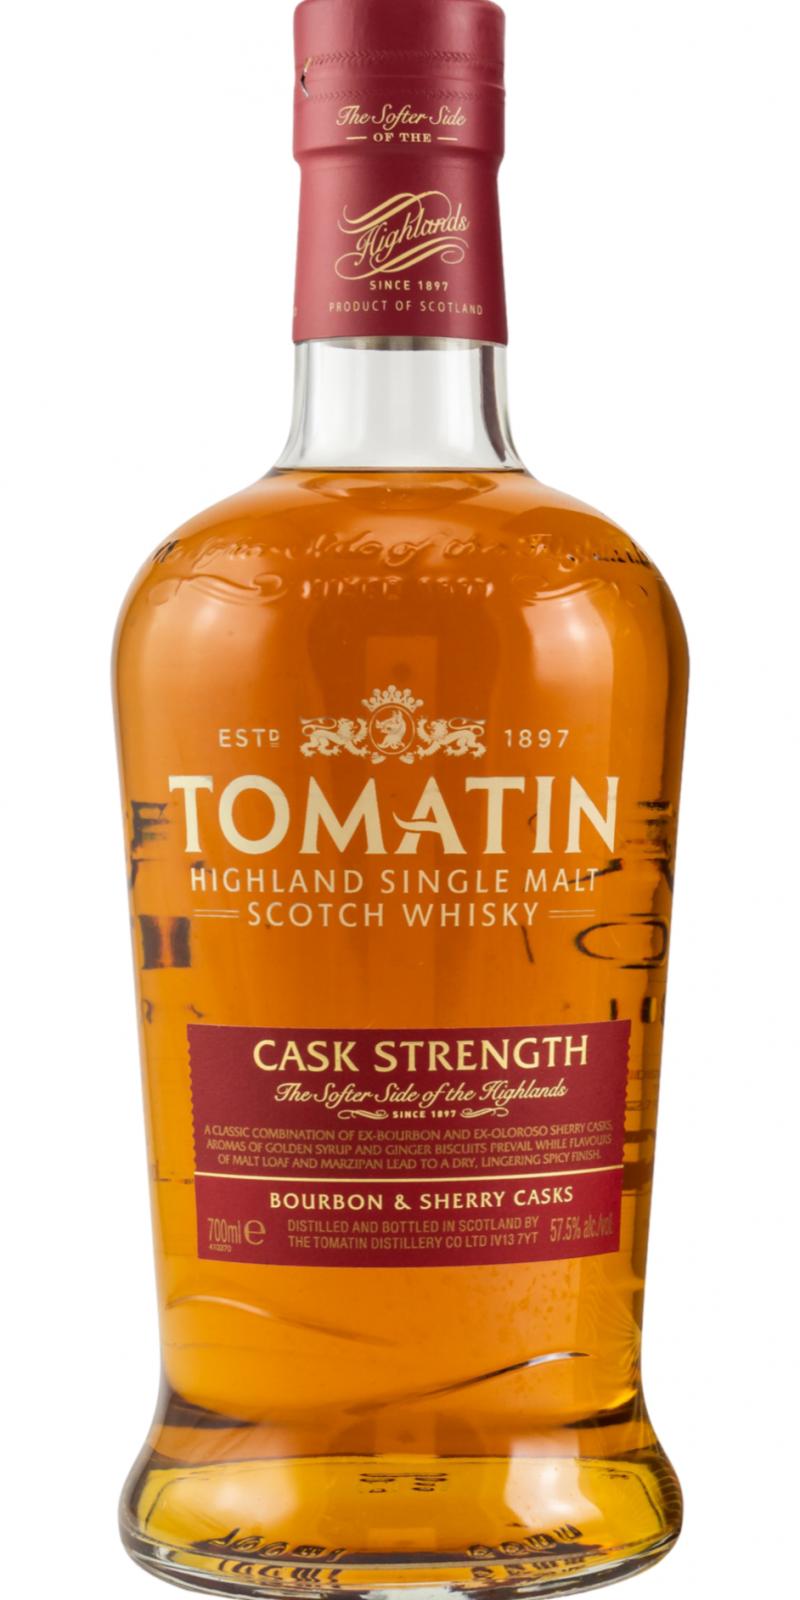 Tomatin Cask Strength Bourbon and Sherry 57.5% 700ml